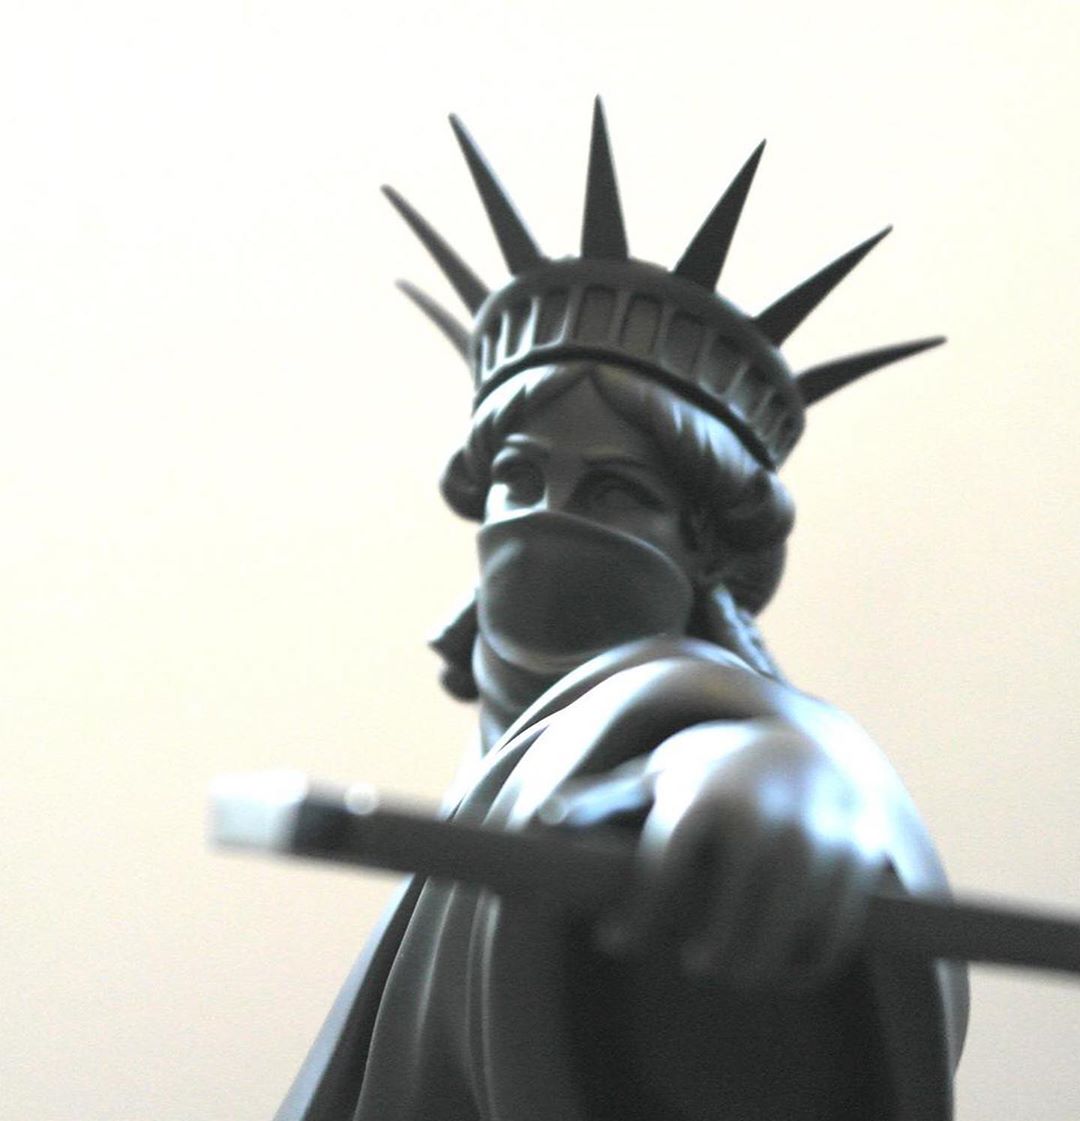 " Statue of Liberty of Banksy"